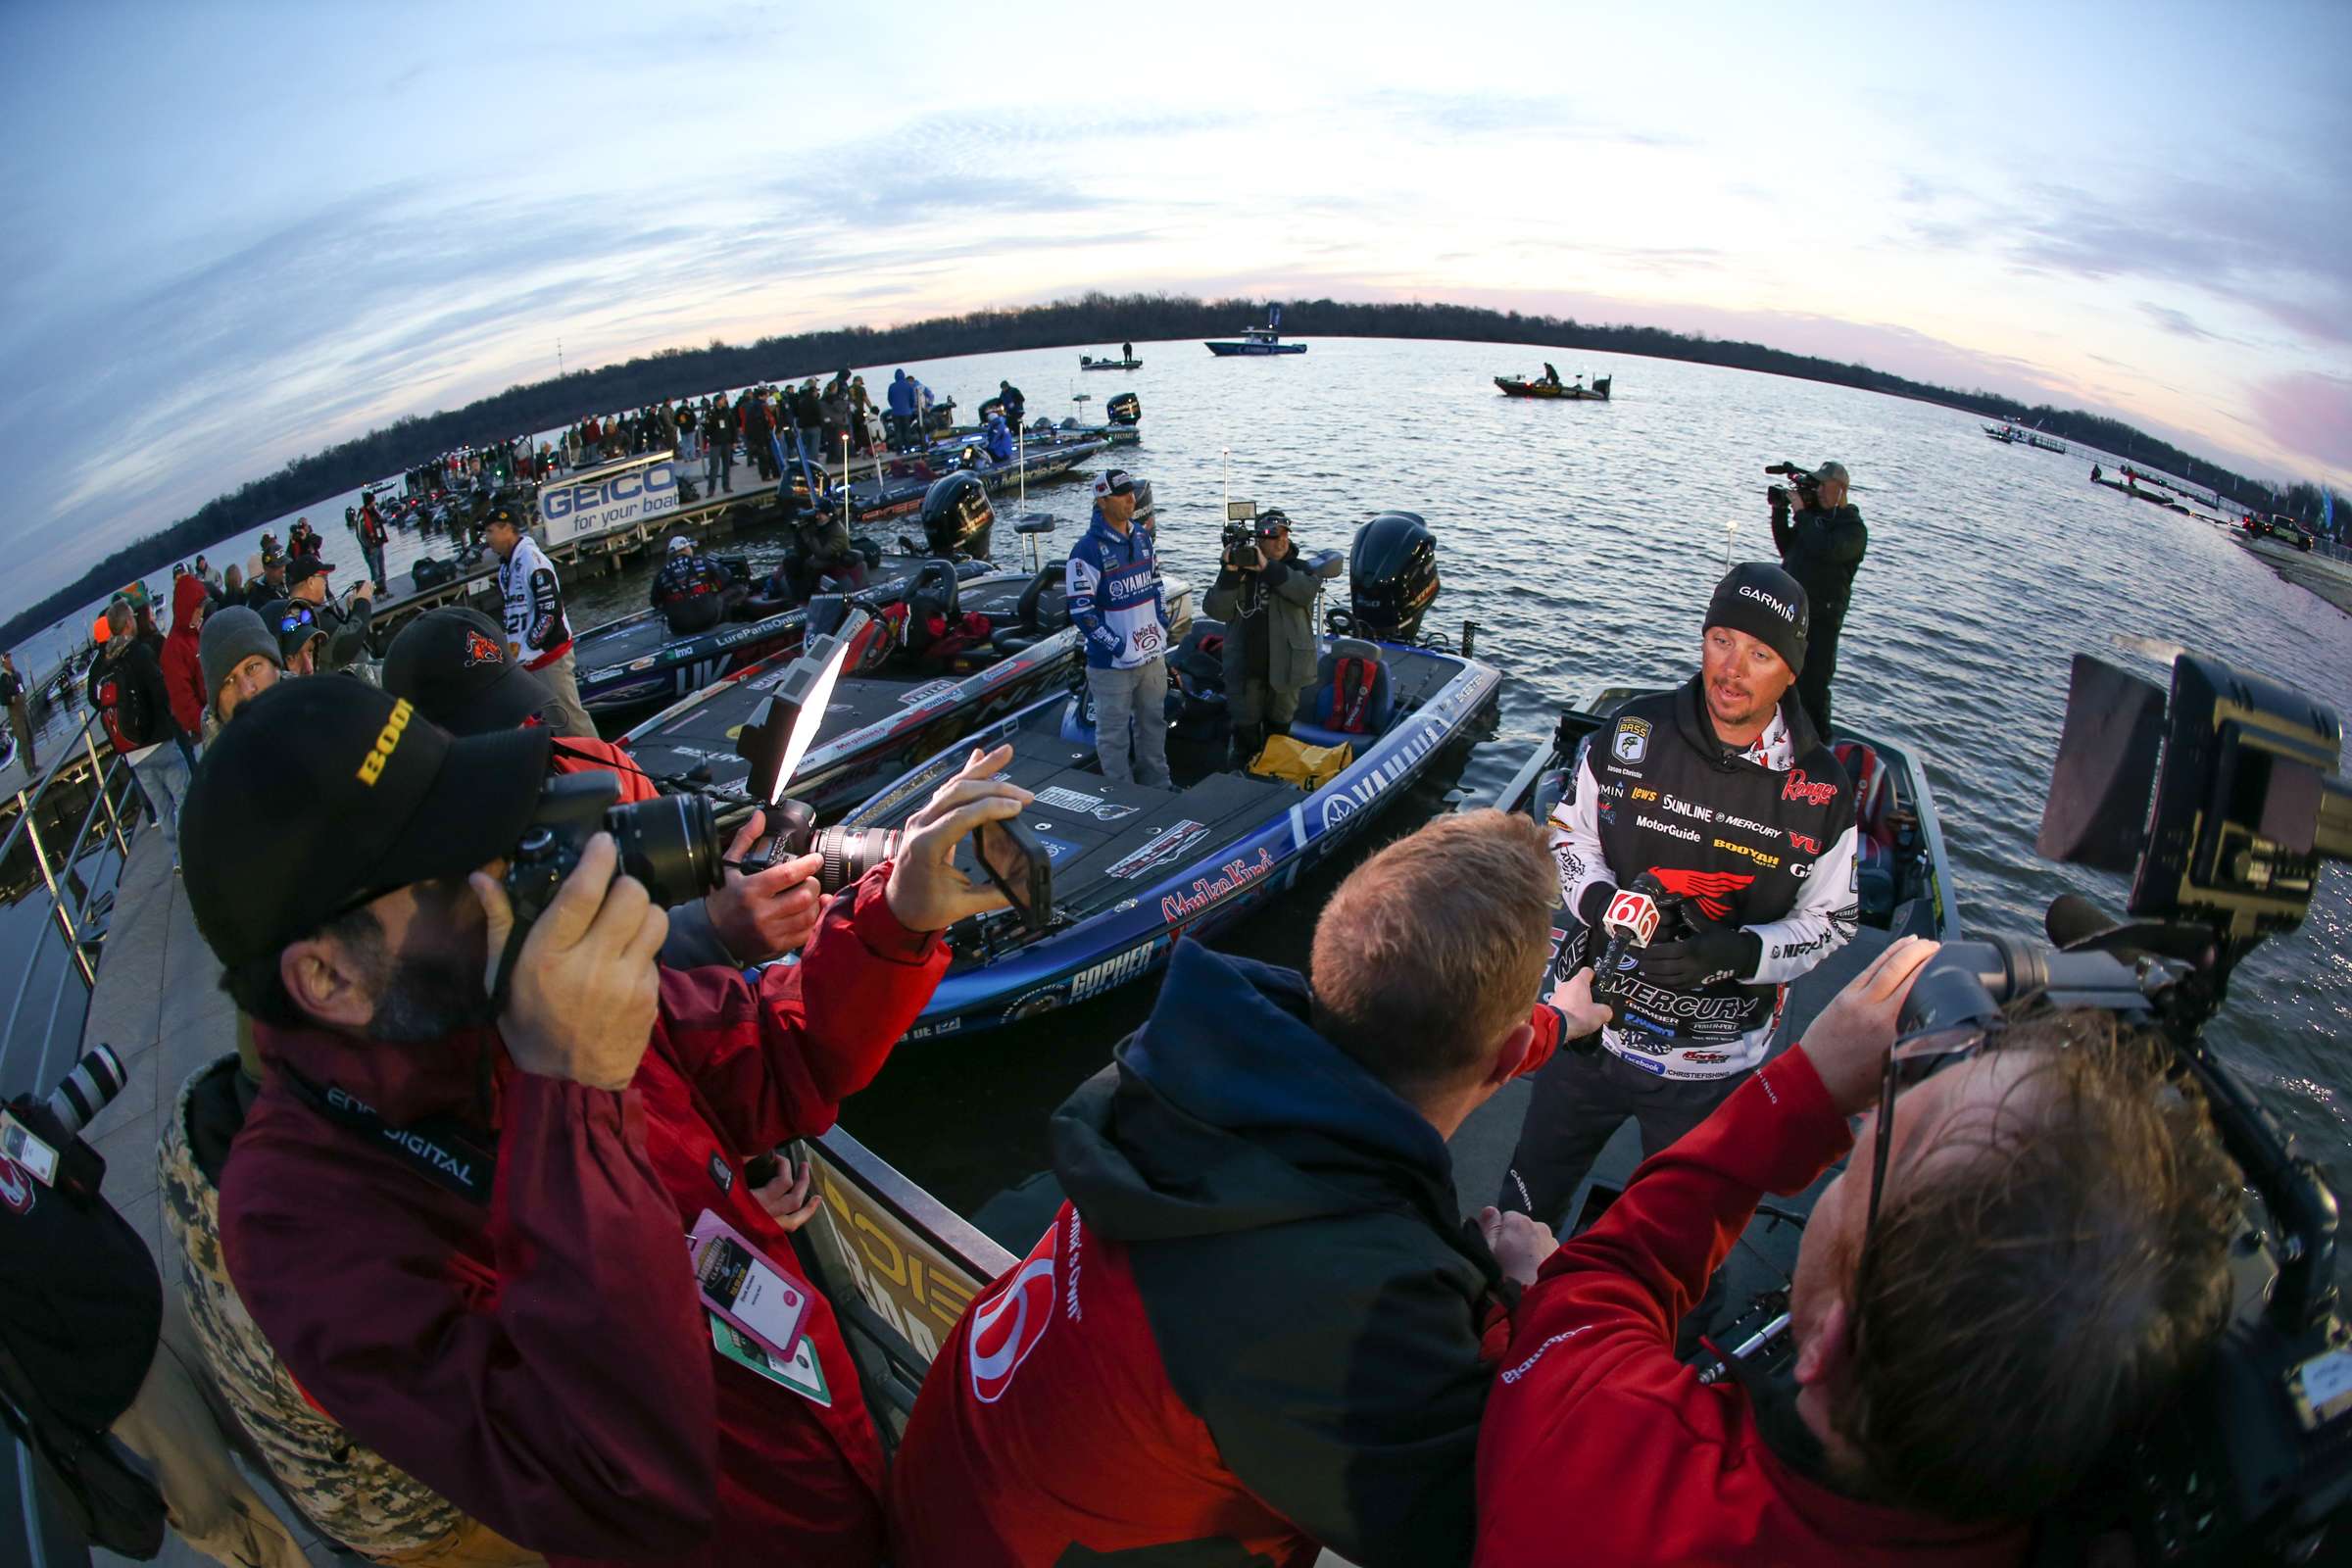 BULL SHOALS/NORFORK, MTN. HOME, ARK. APRIL 21-24. The Bassmaster Elite at Bull Shoals/Norfork is unique in that the venue is split between the two fisheries. Norfork, which most of the field has never competed on, will be fished Days 1 and 4. Christie (2013) and Brandon Palaniuk (2012) won Elite events on Bulls Shoals, but nobody has experienced this switch. Zona believes Casey Scanlon will get it done here.